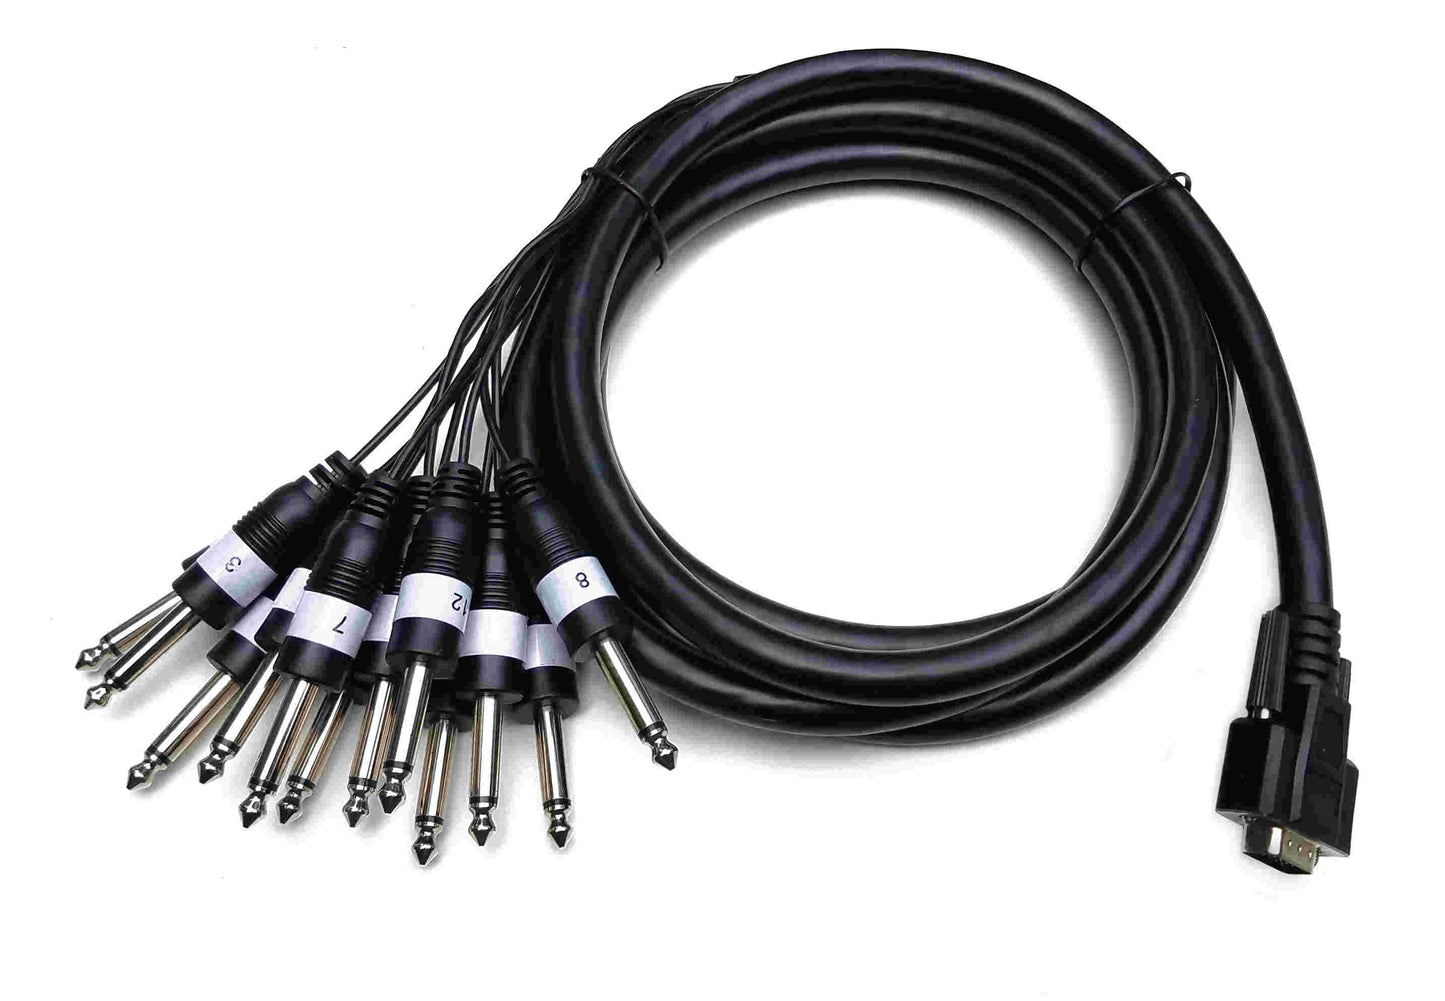 HD15 Breakout Cable